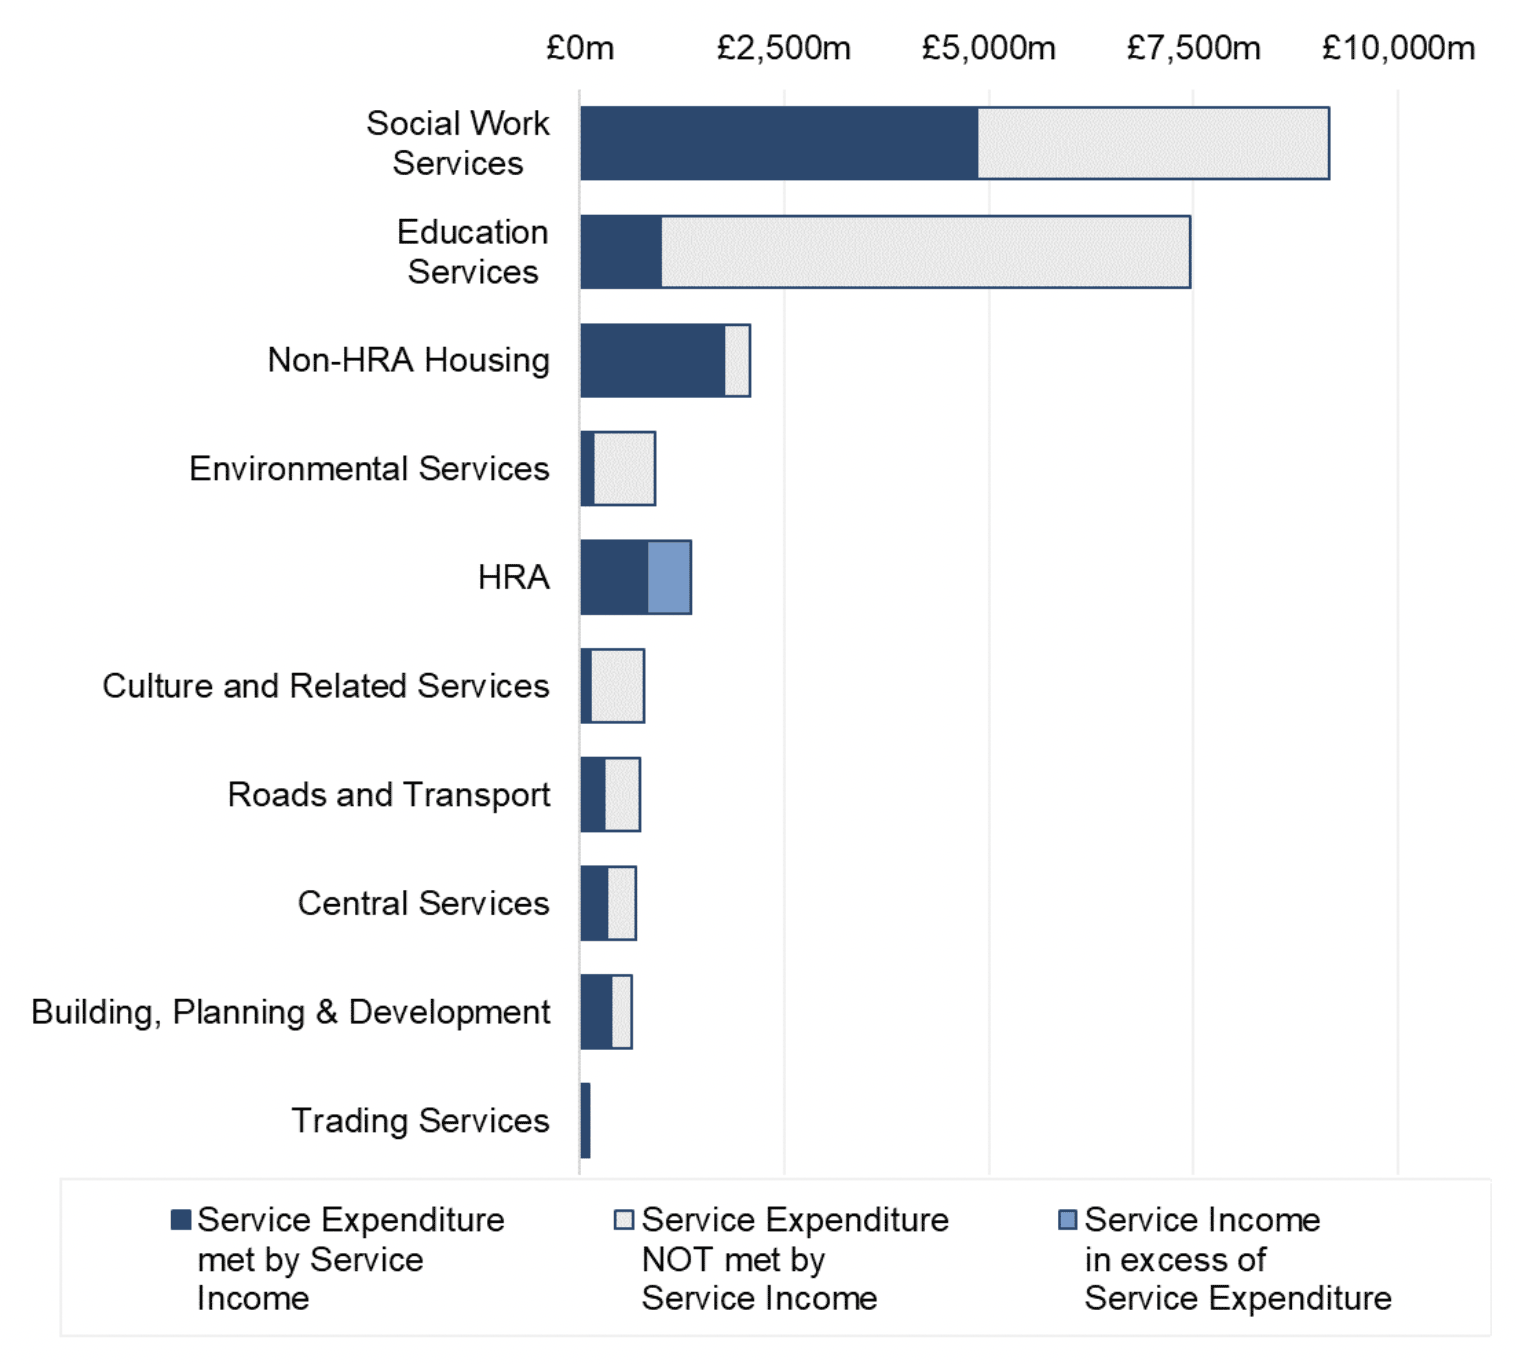 Bar chart showing the proportion of service expenditure met by service income for each service. This varies significantly between services as they each receive different levels of grants and contributions, and services have differing abilities to generate service income in the form of customer and client receipts.